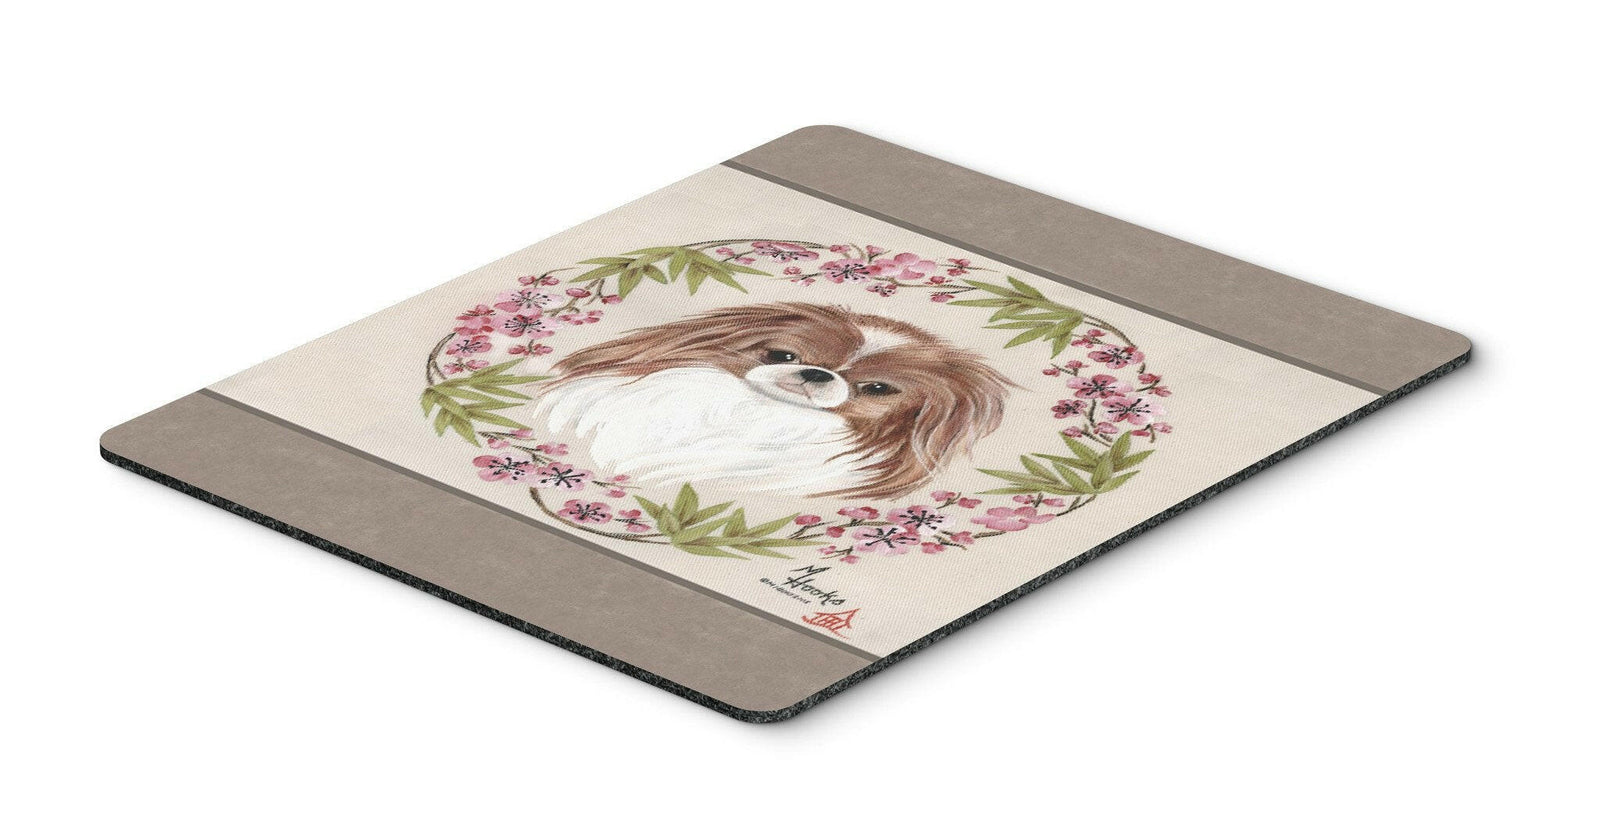 Japanese Chin Wreath of Flowers Mouse Pad, Hot Pad or Trivet MH1009MP by Caroline's Treasures